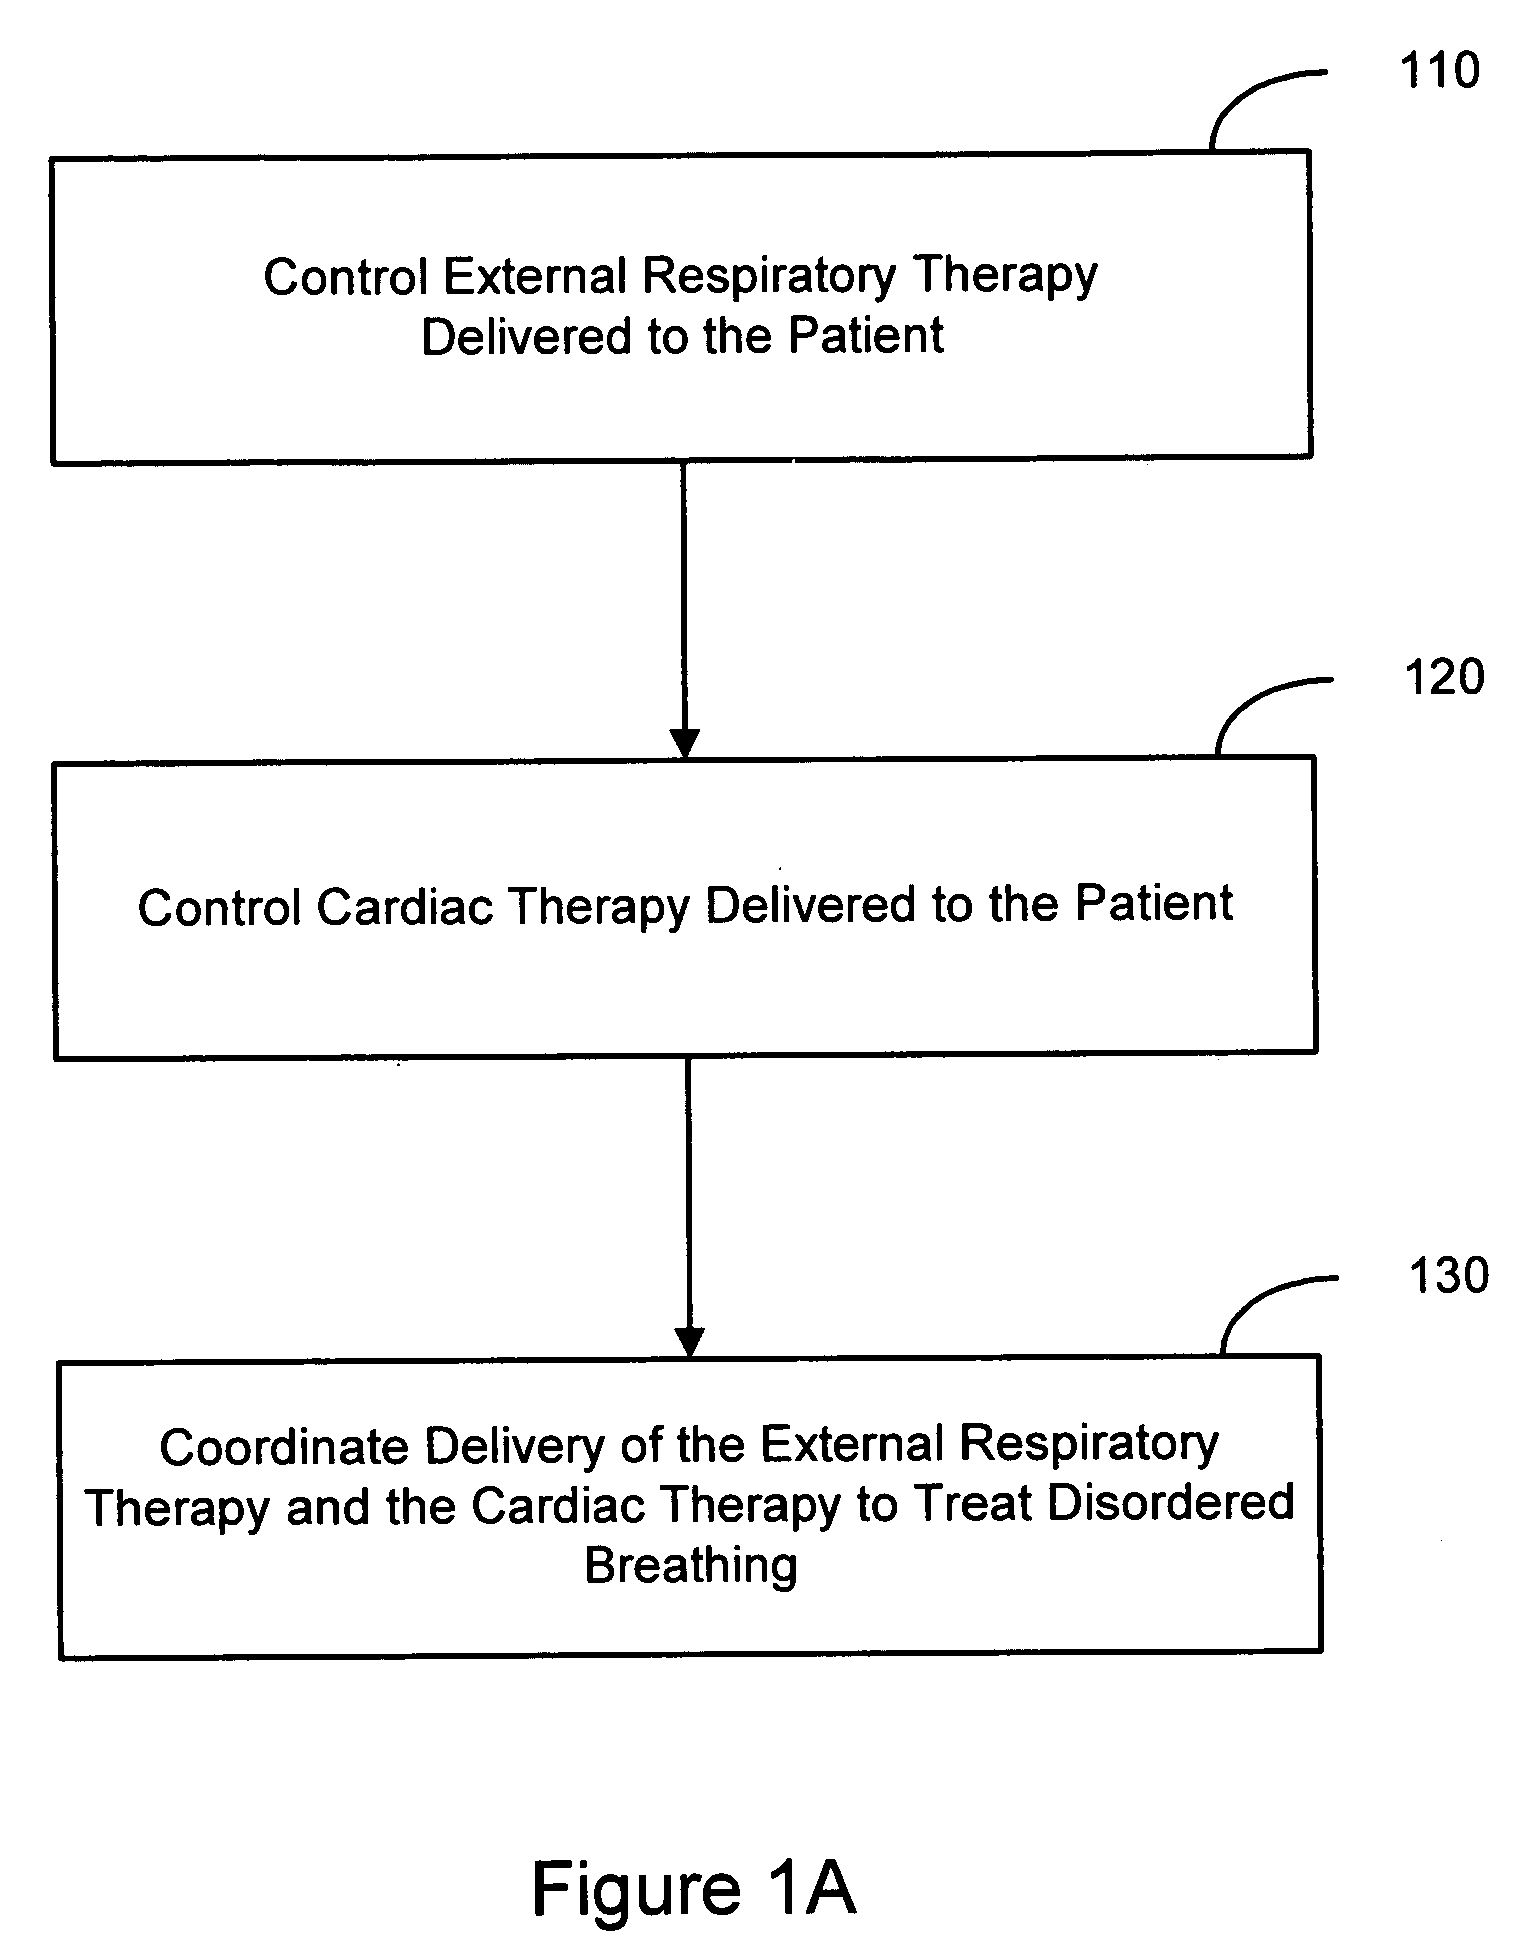 Coordinated use of respiratory and cardiac therapies for sleep disordered breathing